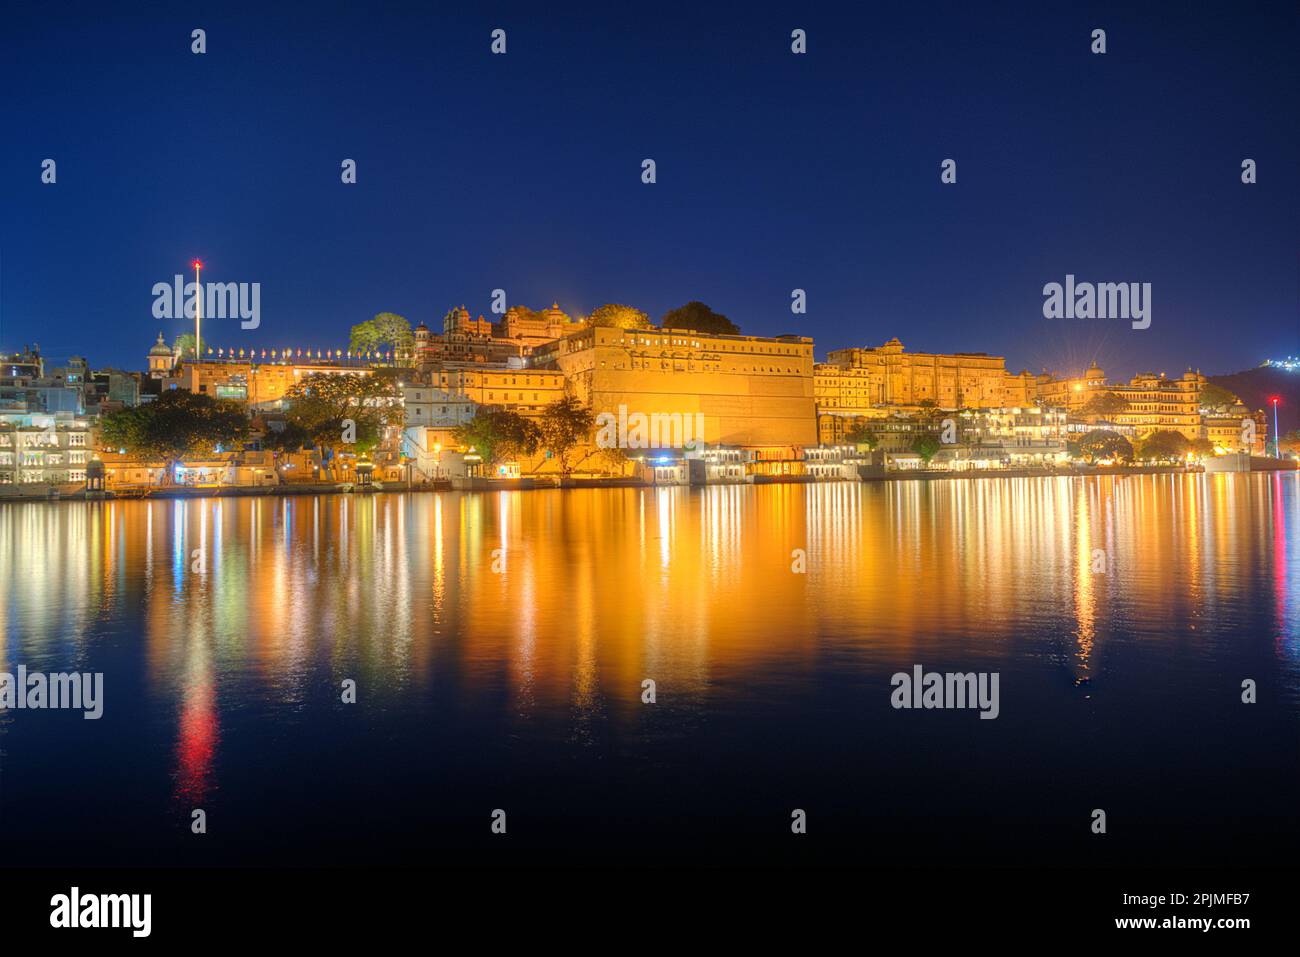 THE PHOTOGRAPHS PRESENTED HERE ARE OF UDAIPUR, RAJASTHAN - INDIA. THE PHOTOGRAPHS ARE OF NIGHT VIEW UDAIPURCITYSCAPES TAKEN AT THE AMBRAI GHAT. Stock Photo